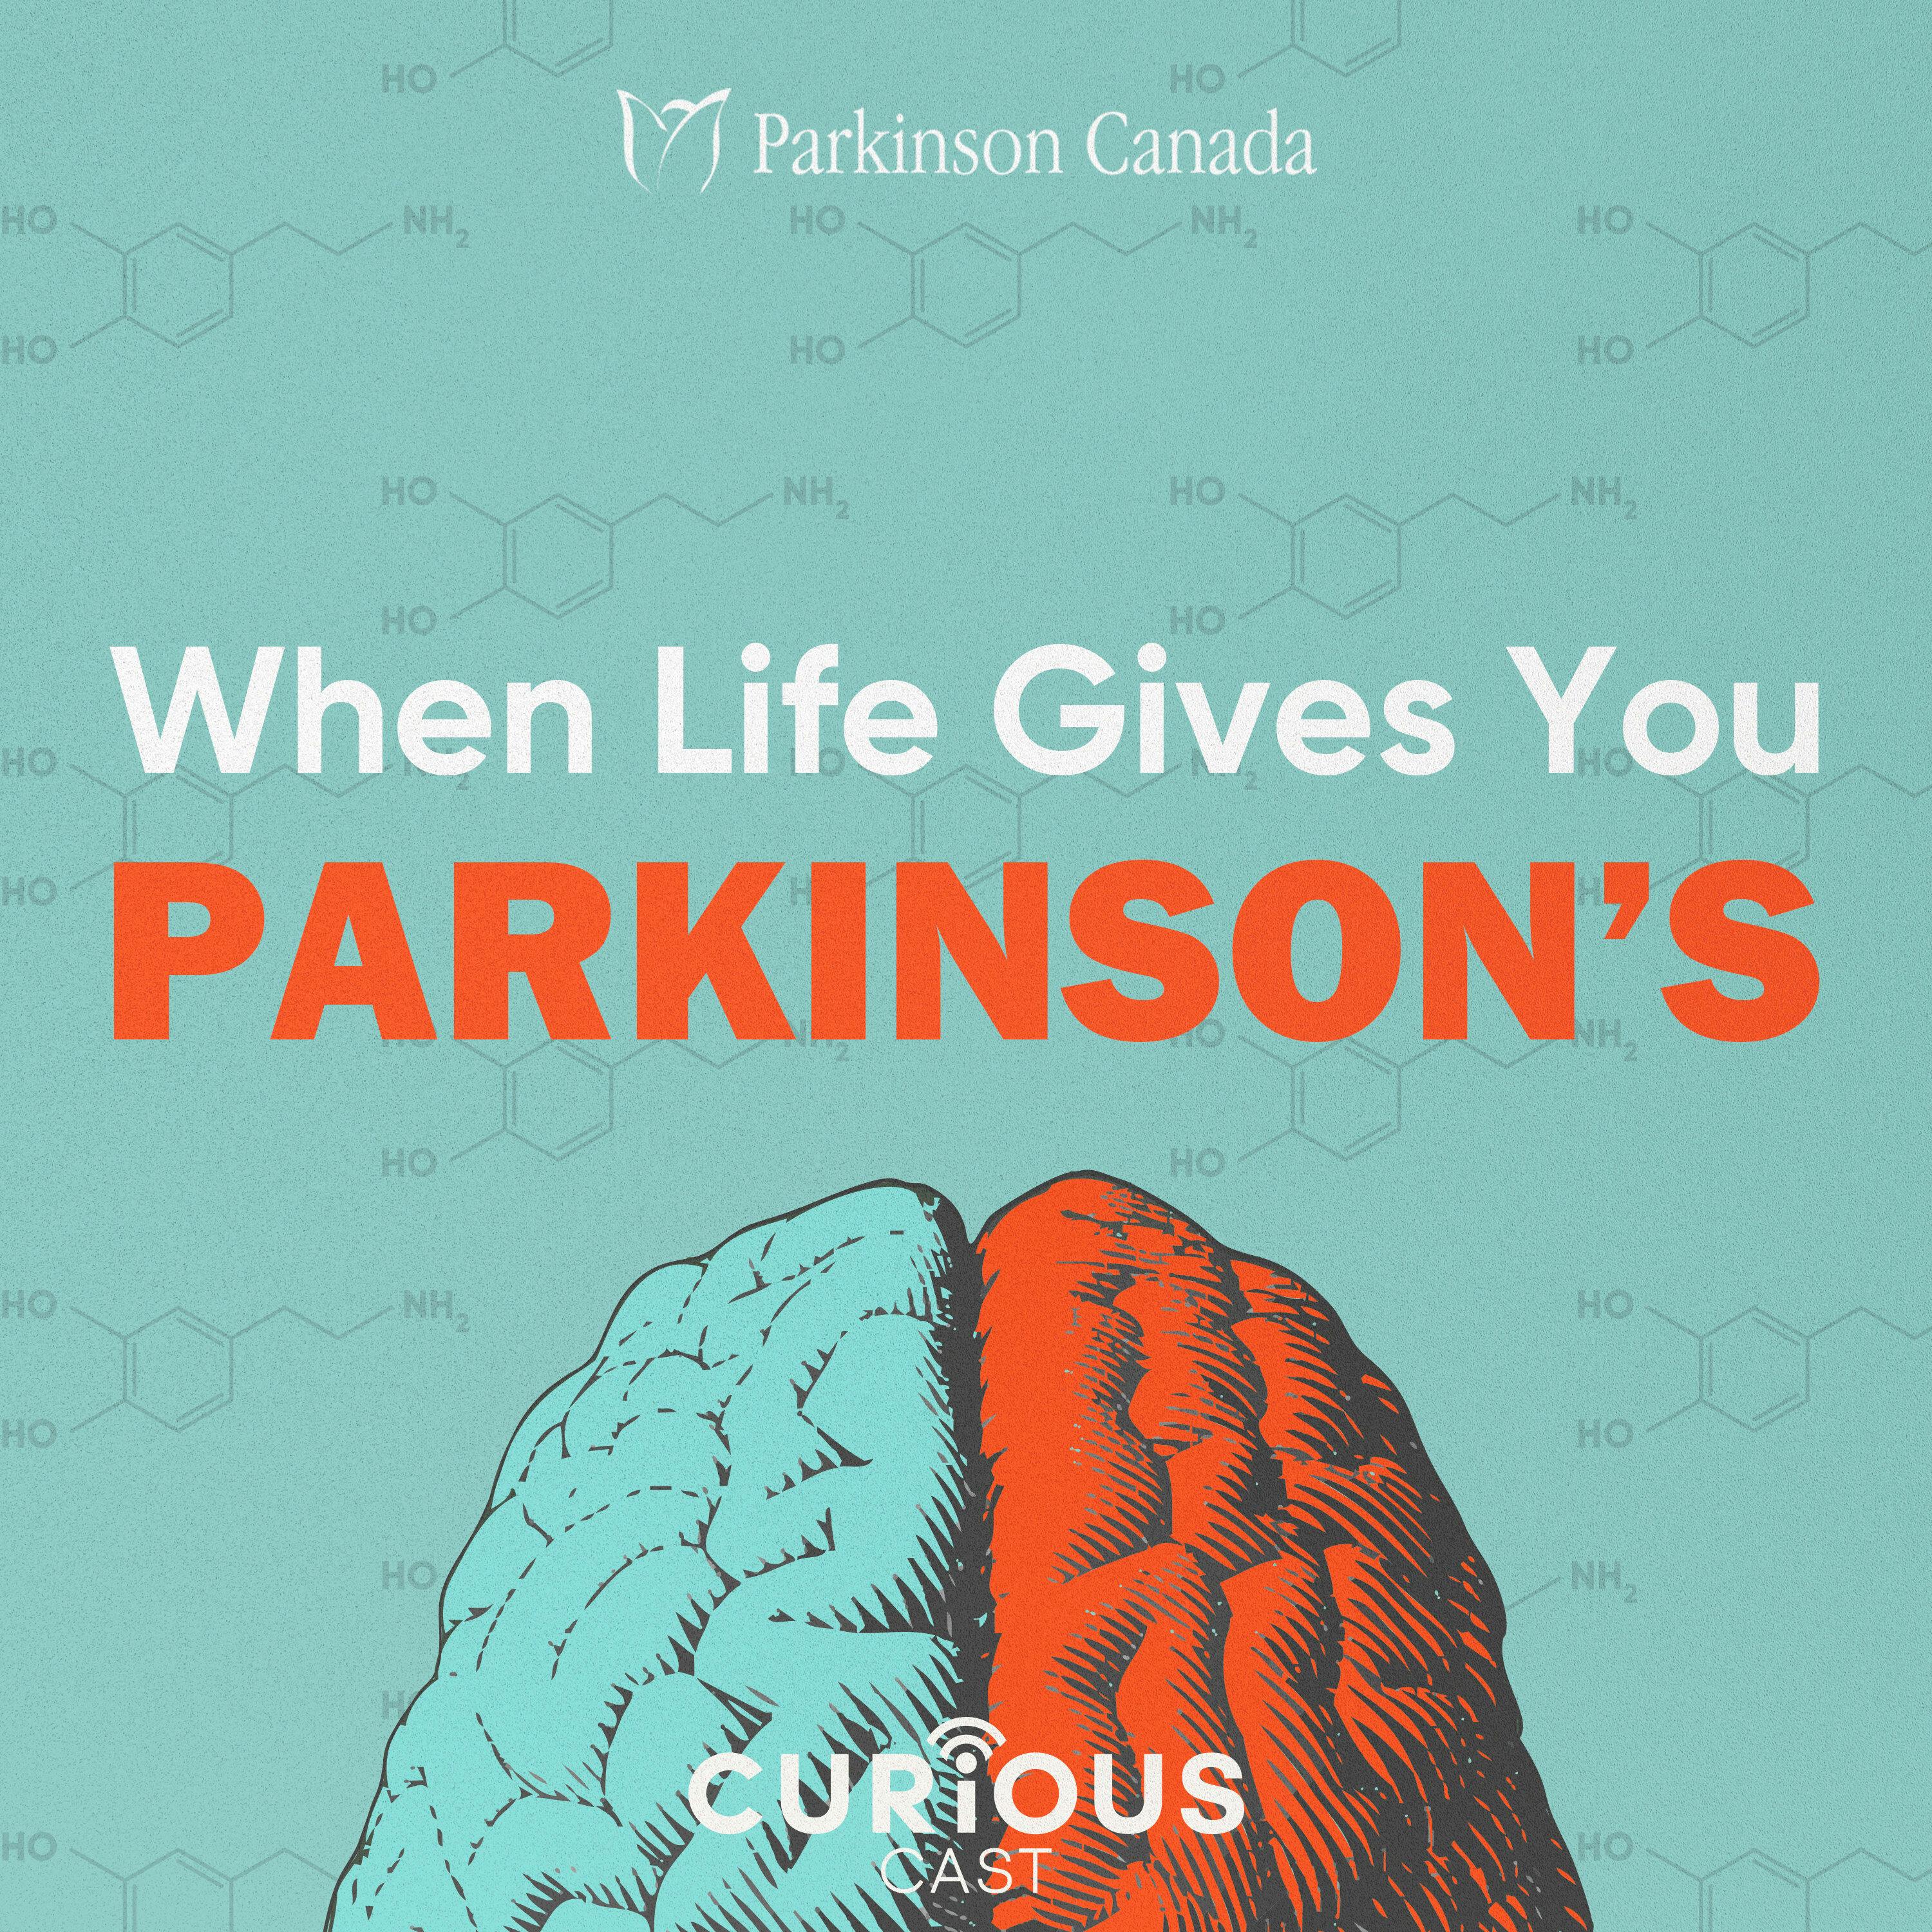 Extra Dosage |   I’m the World’s Leading Expert in My Parkinson’s